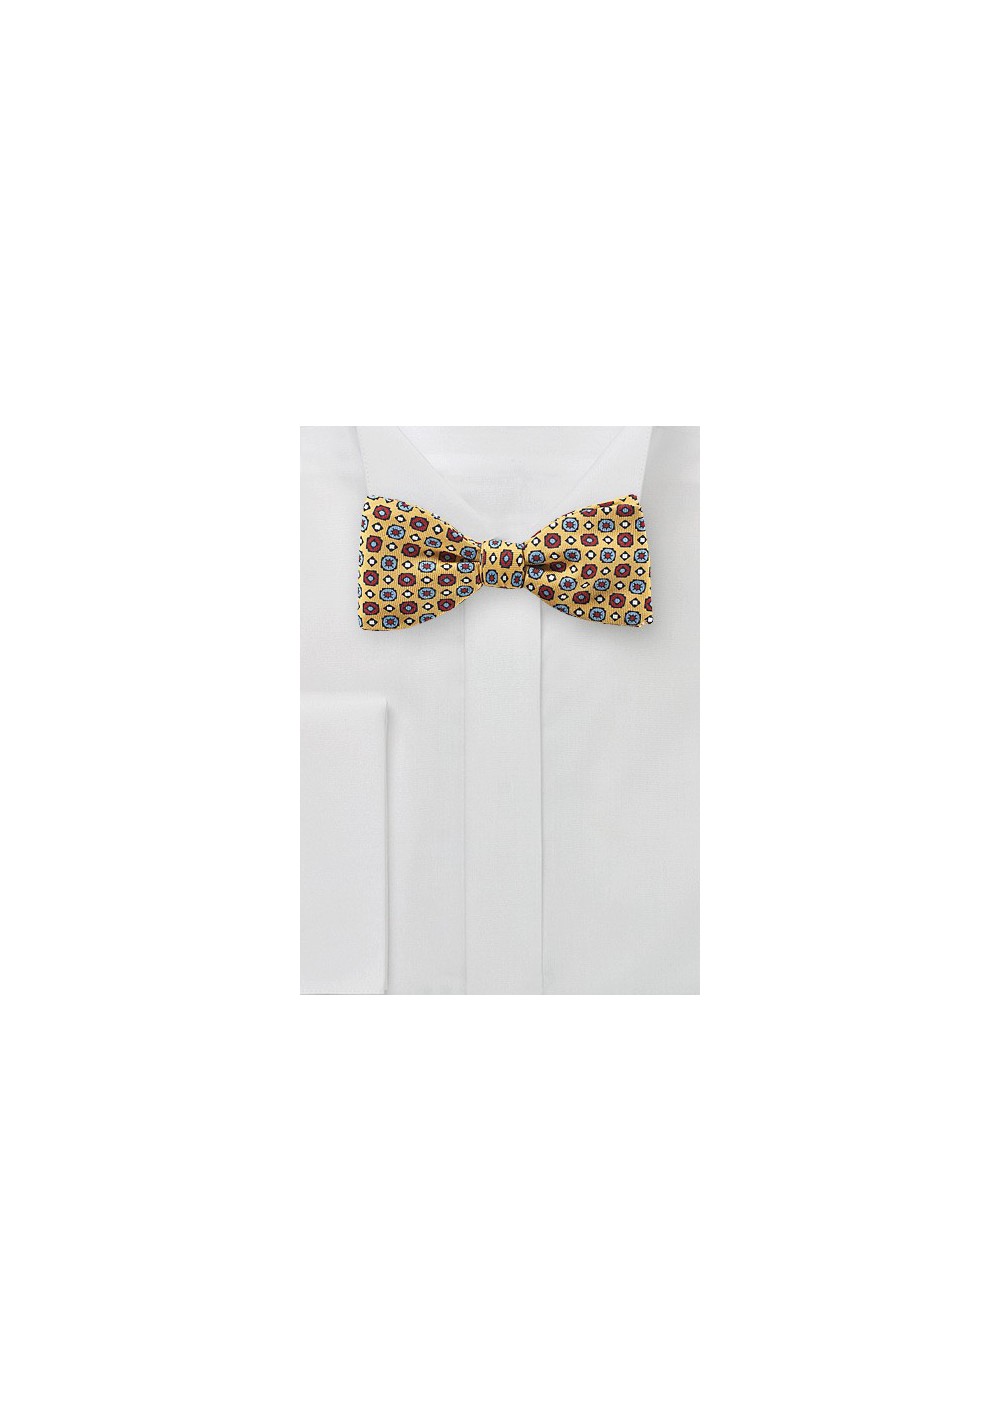 Geo Print Bow Tie in yellow, Blue, and Red